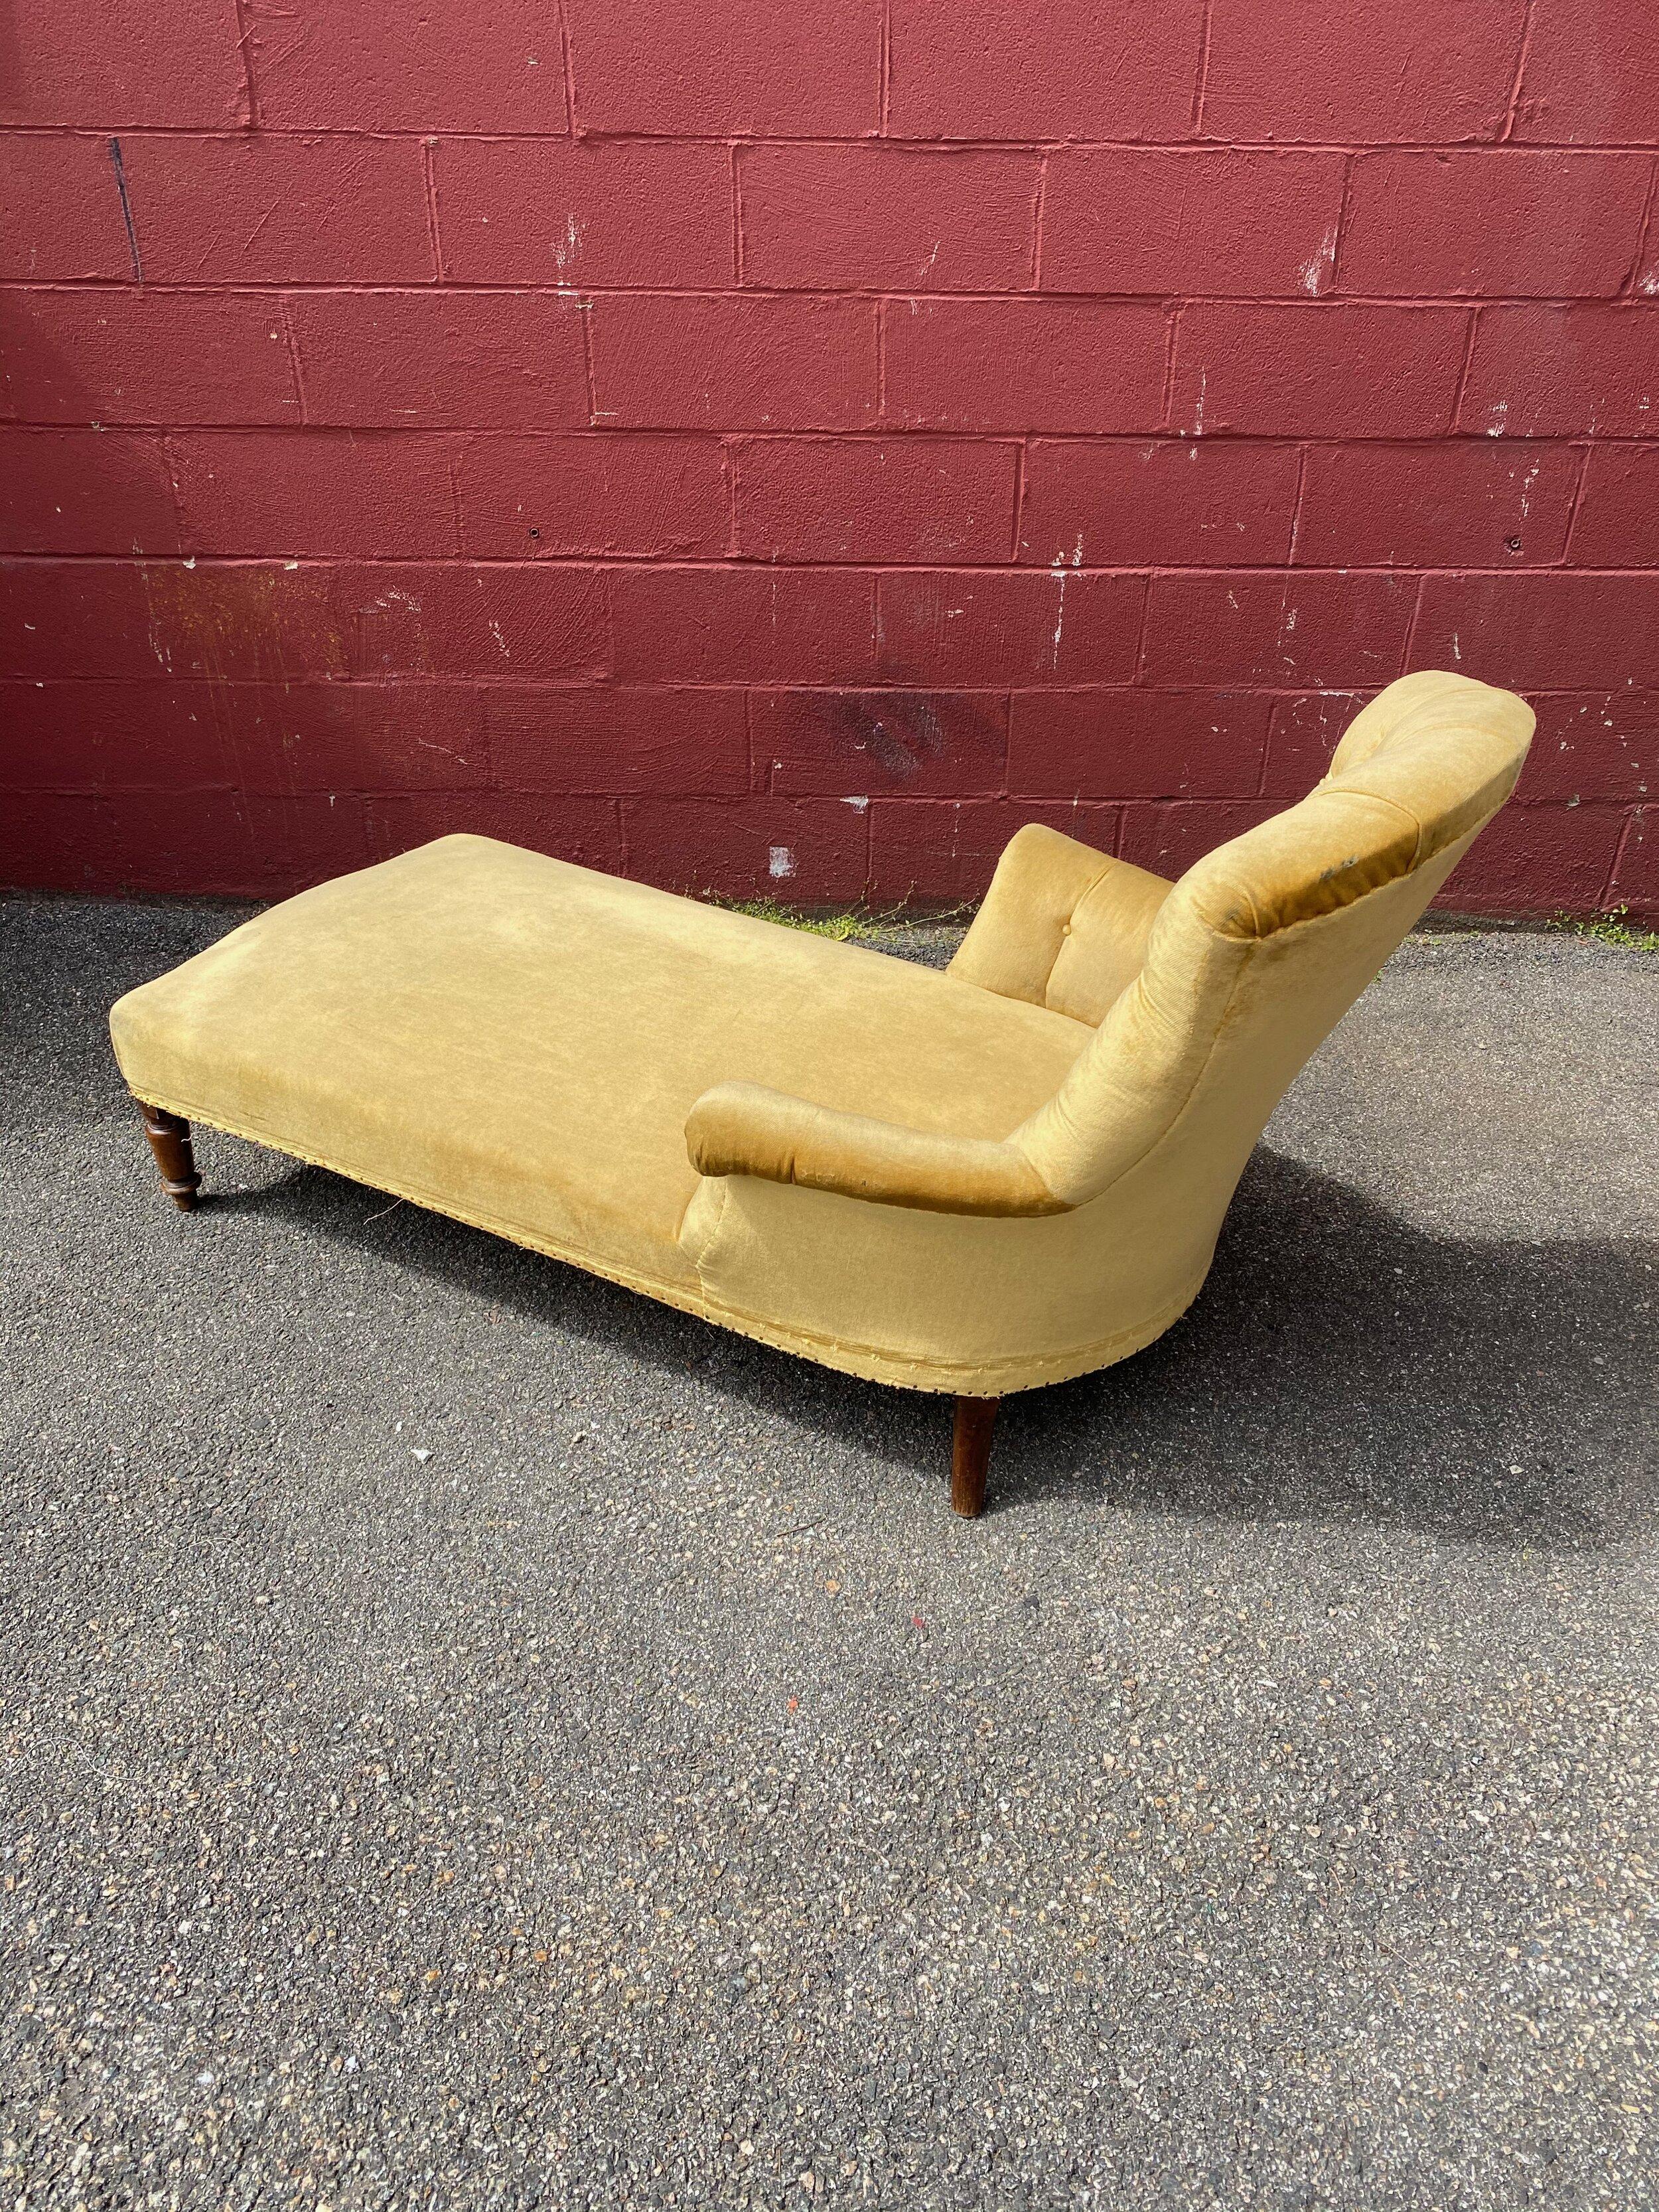 Late 19th Century French Napoleon III Chaise Longue in Gold Velvet